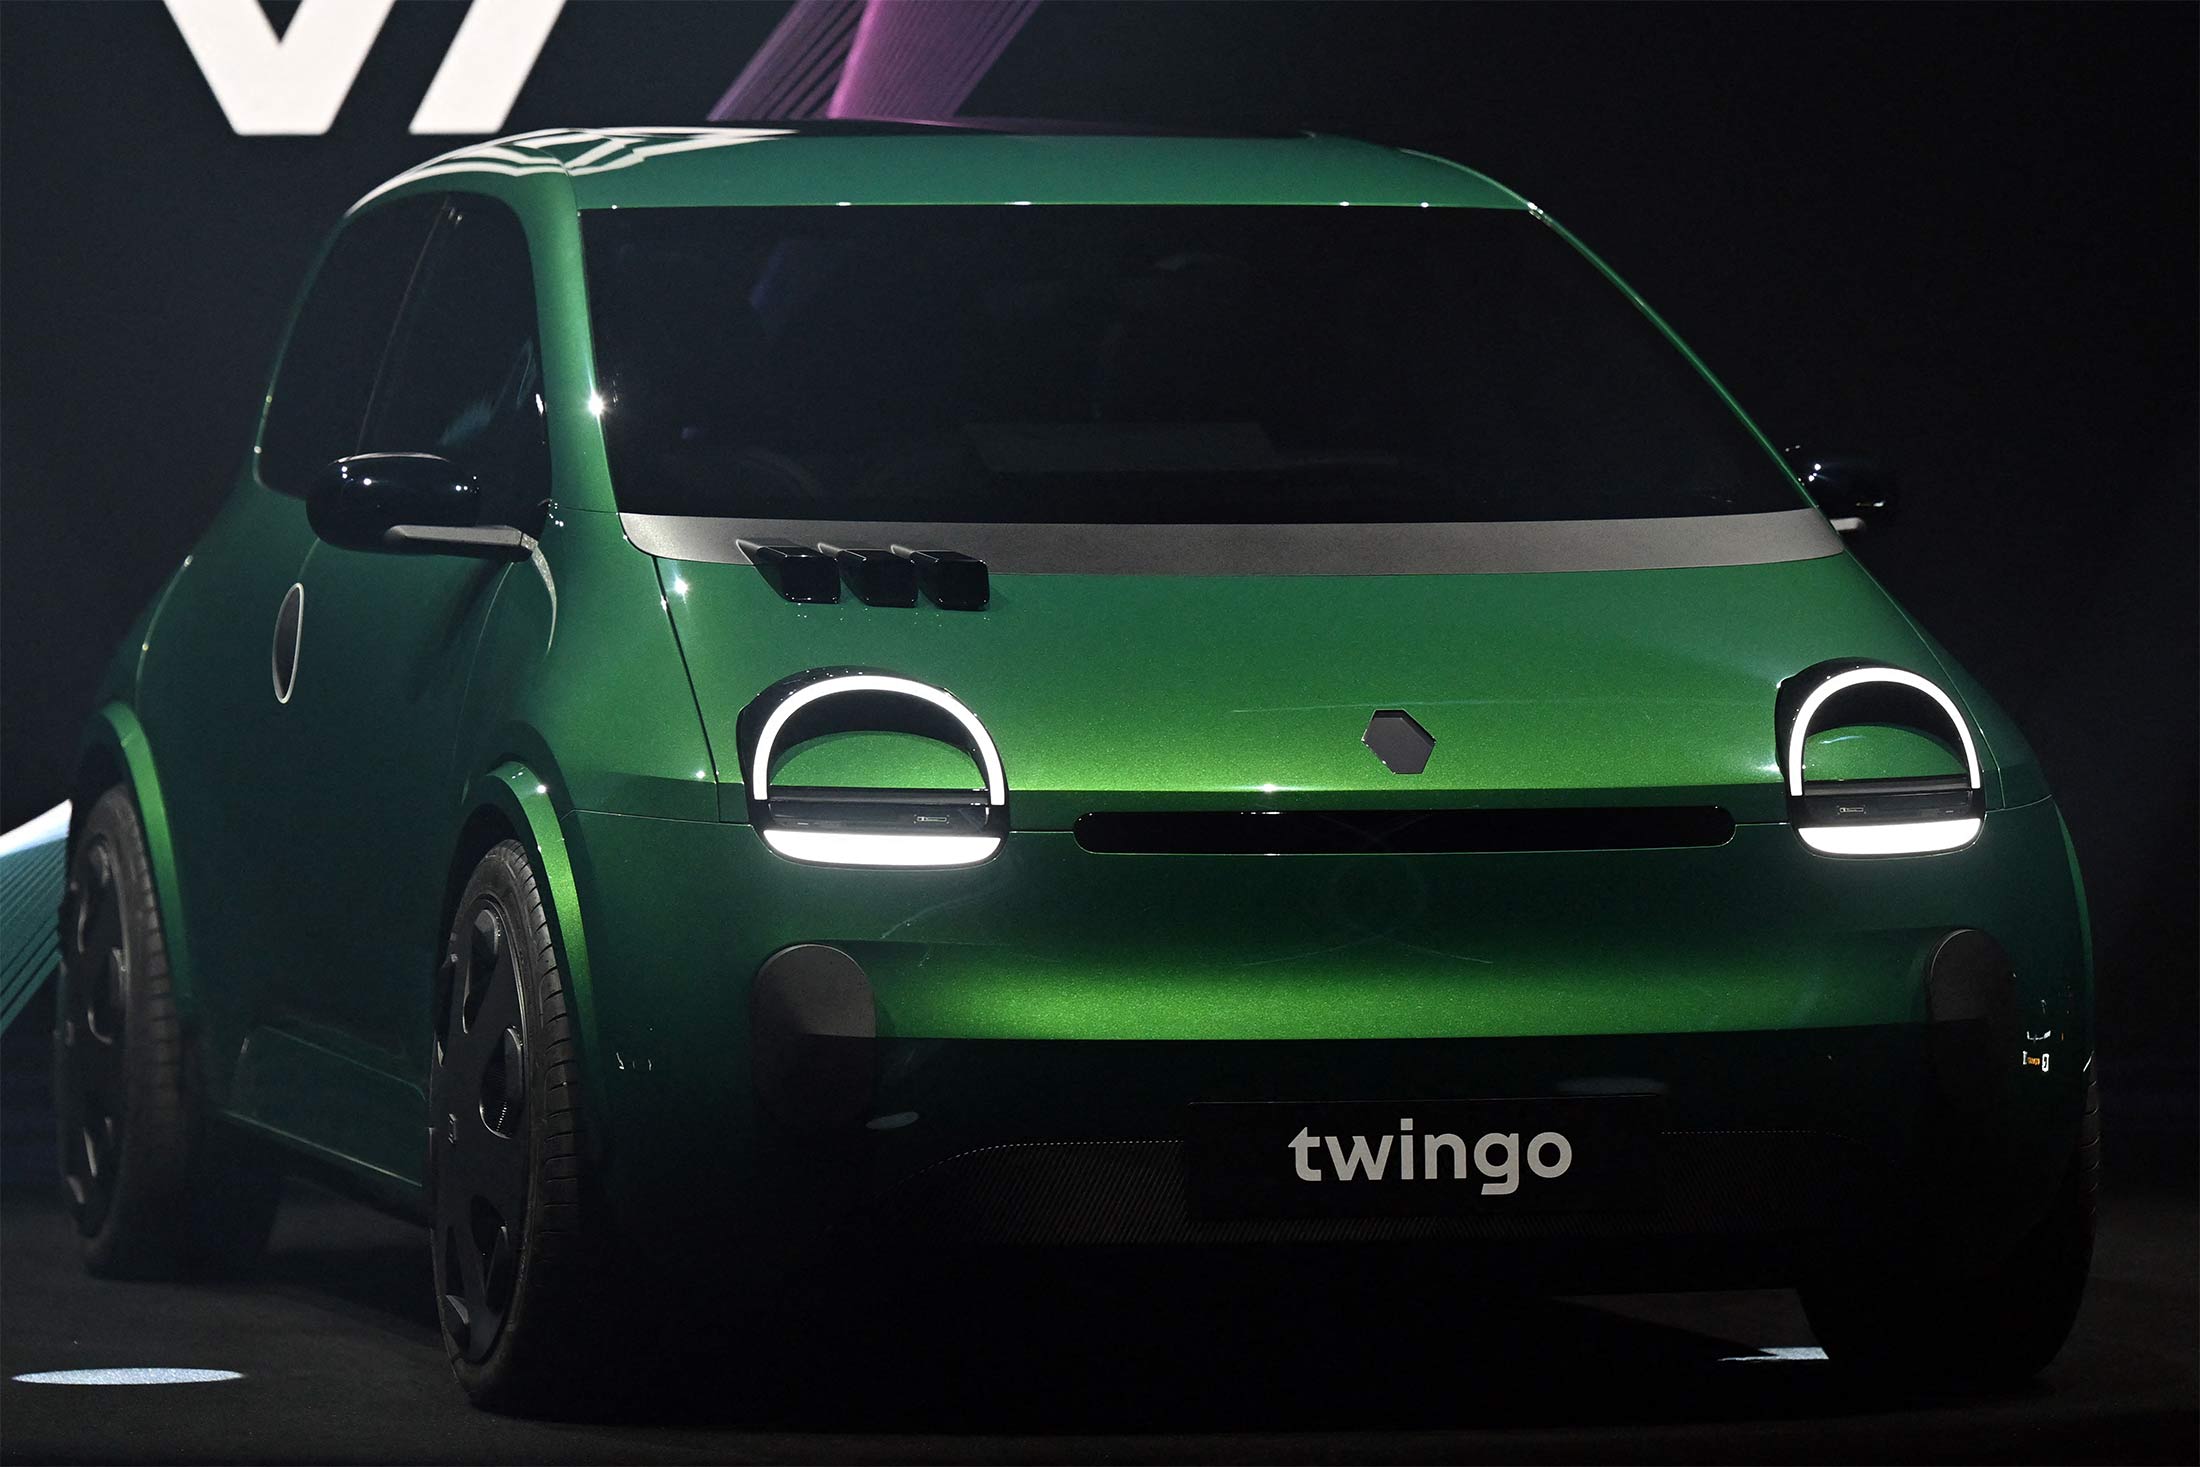 A Modern Reimagining of the 30-Year-Old Renault Twingo